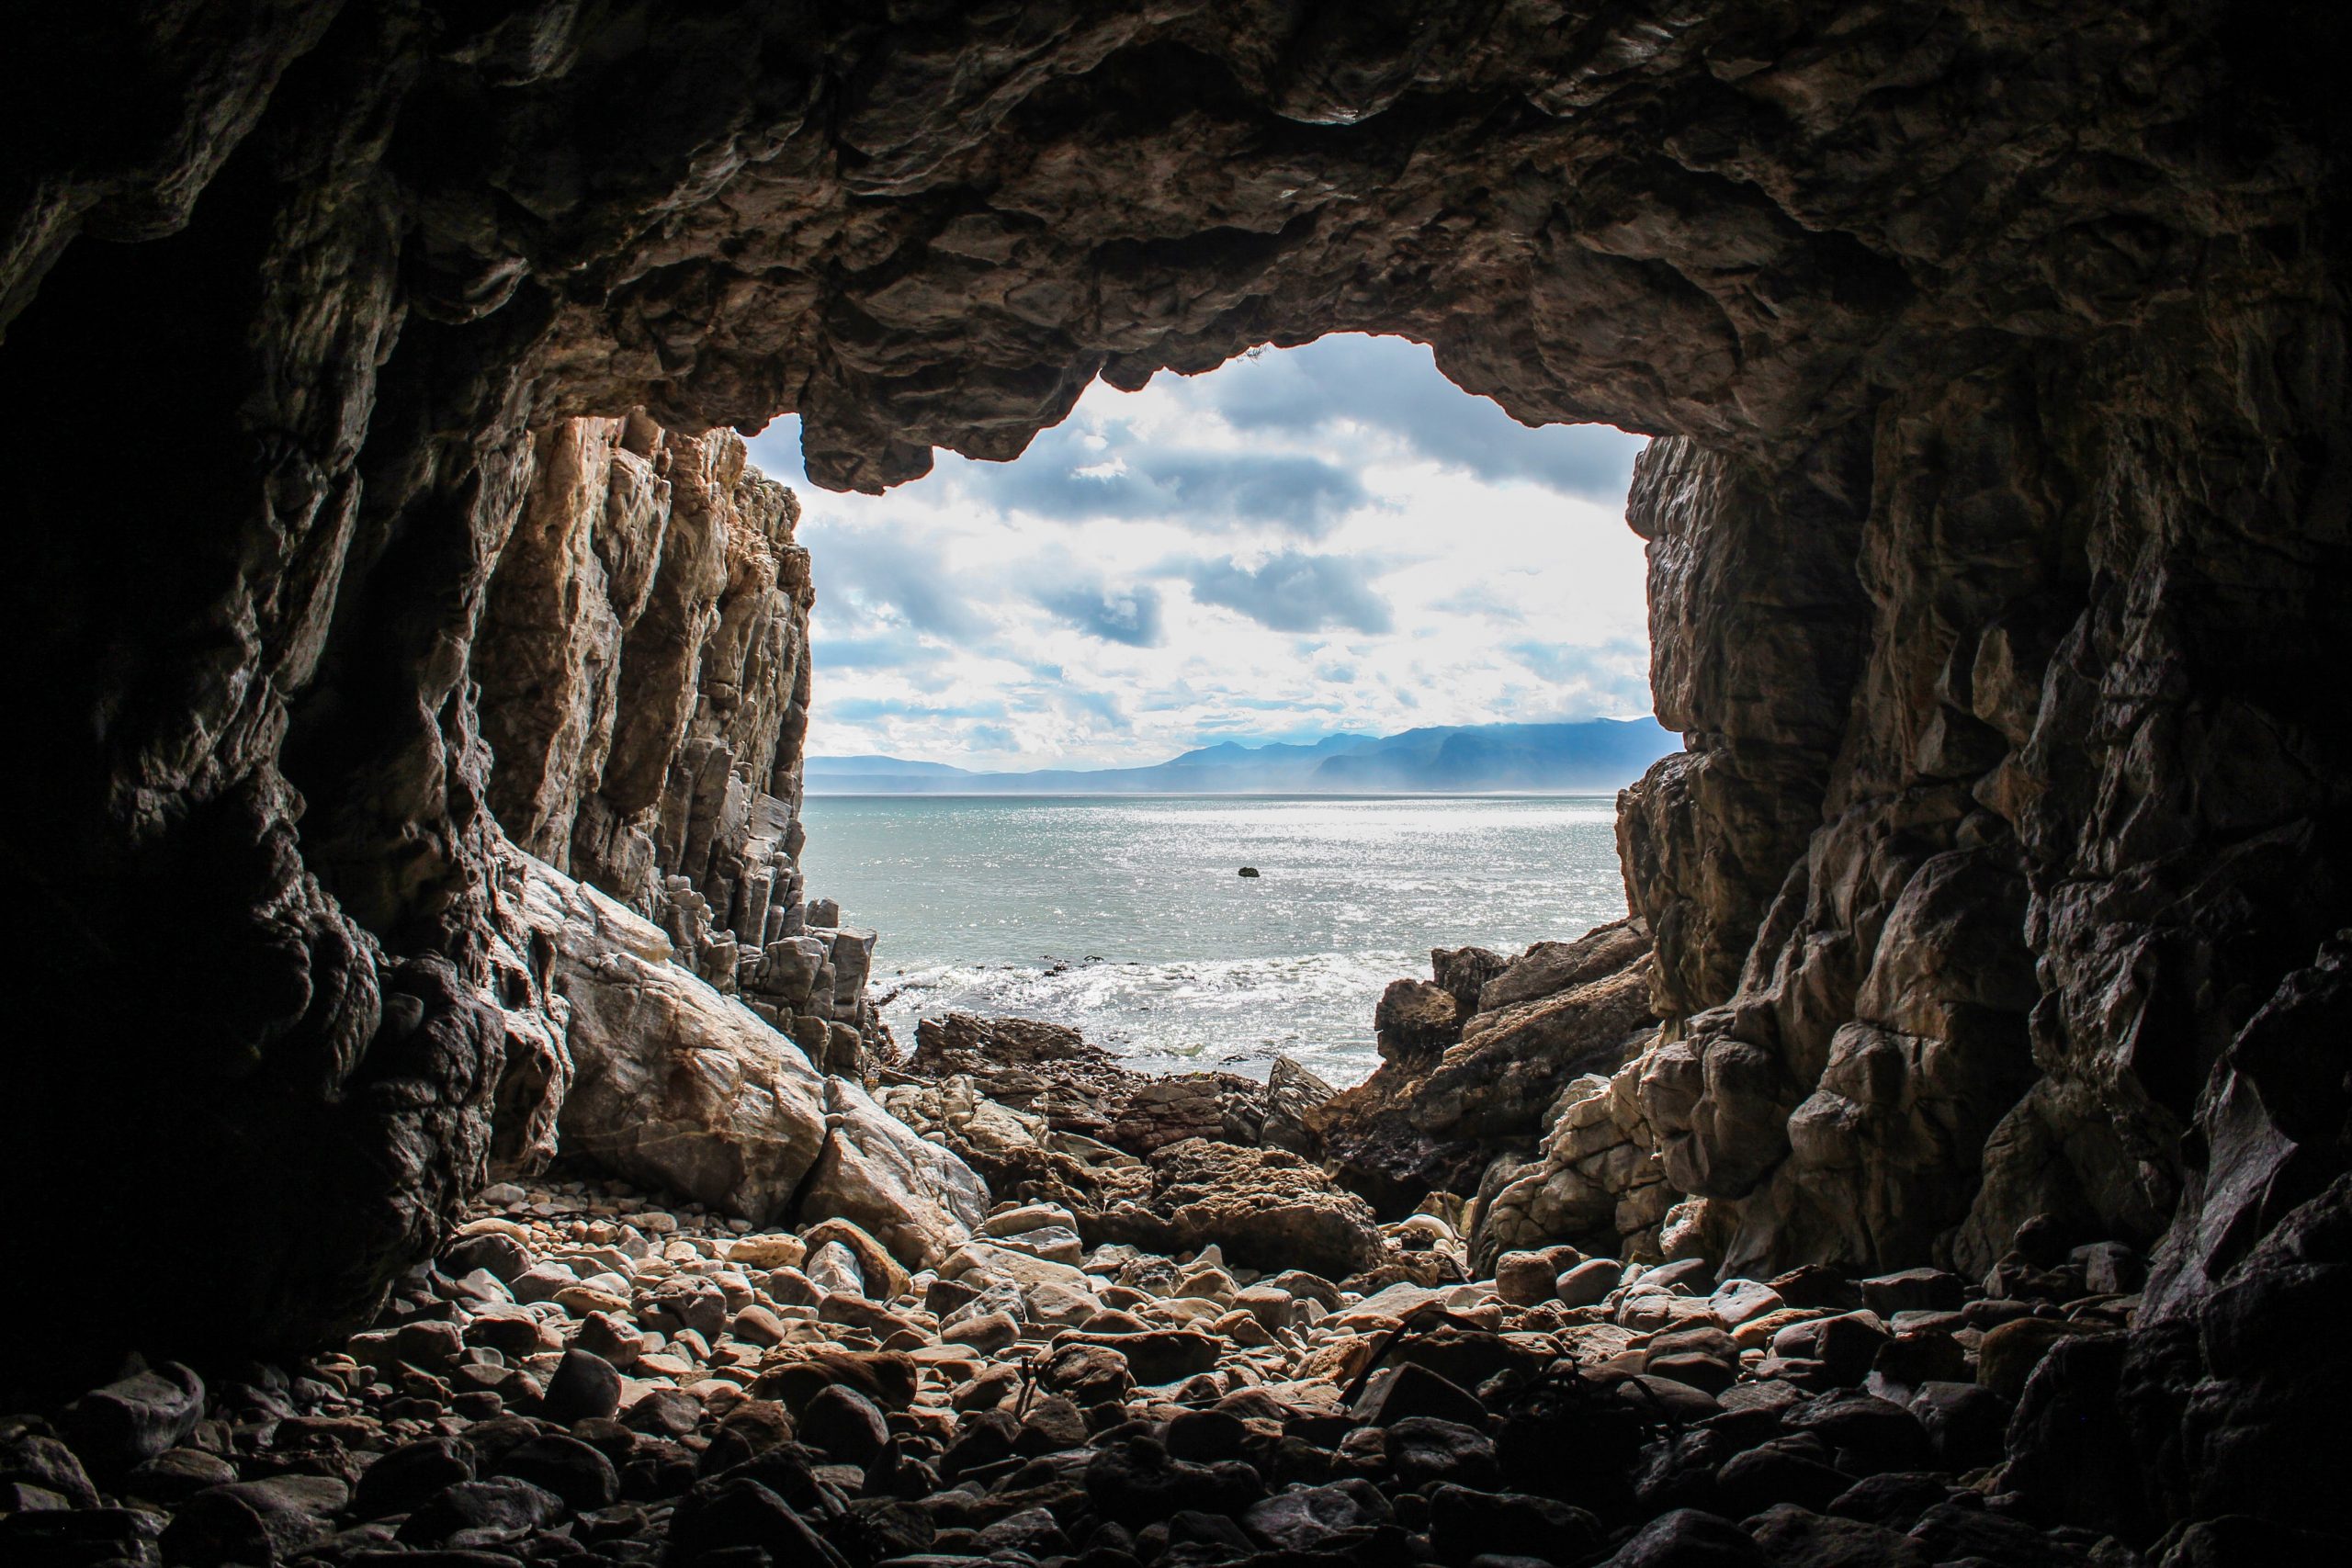 A photograph of the opening of a rocky cave. The camera points outwards from within the cave, depicting a shimmering blue lake, grey clouds, and mountains in the distance.